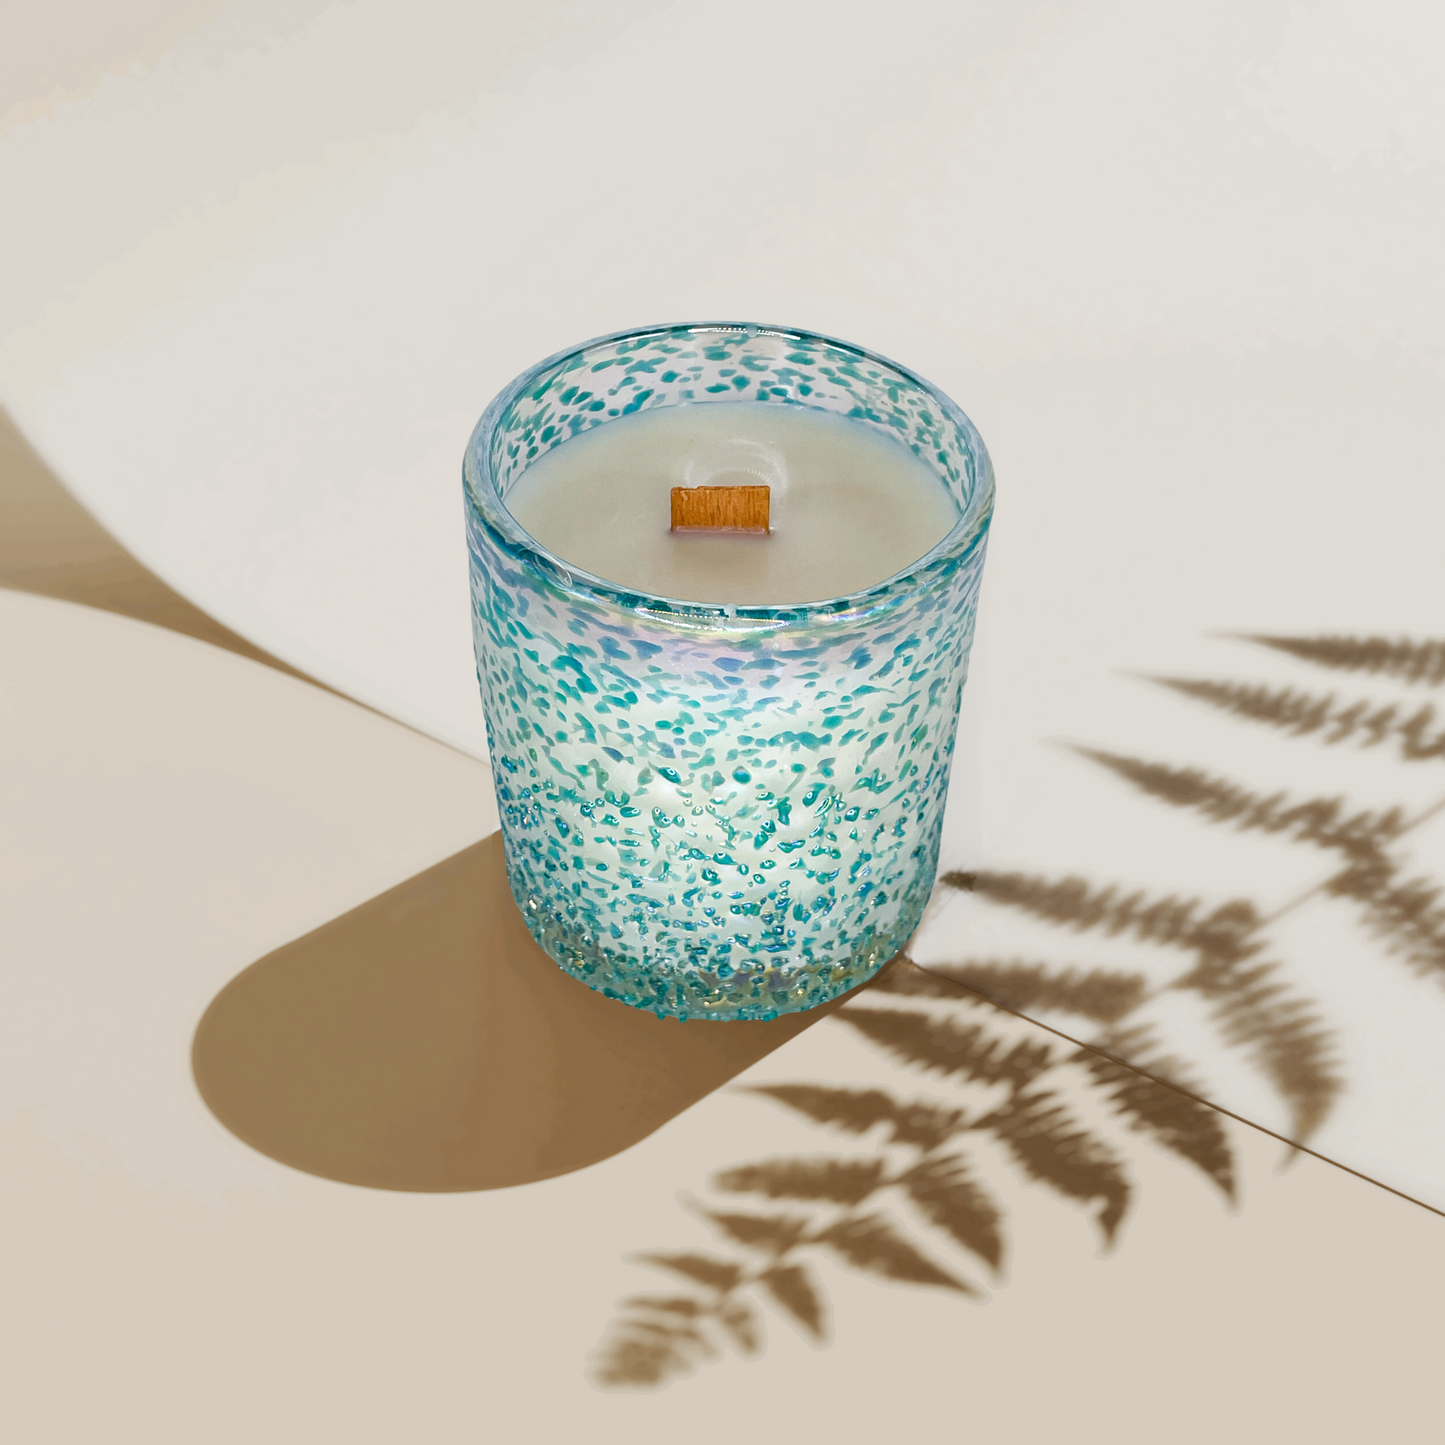 Blue Lagoon Scented Candle by novembre